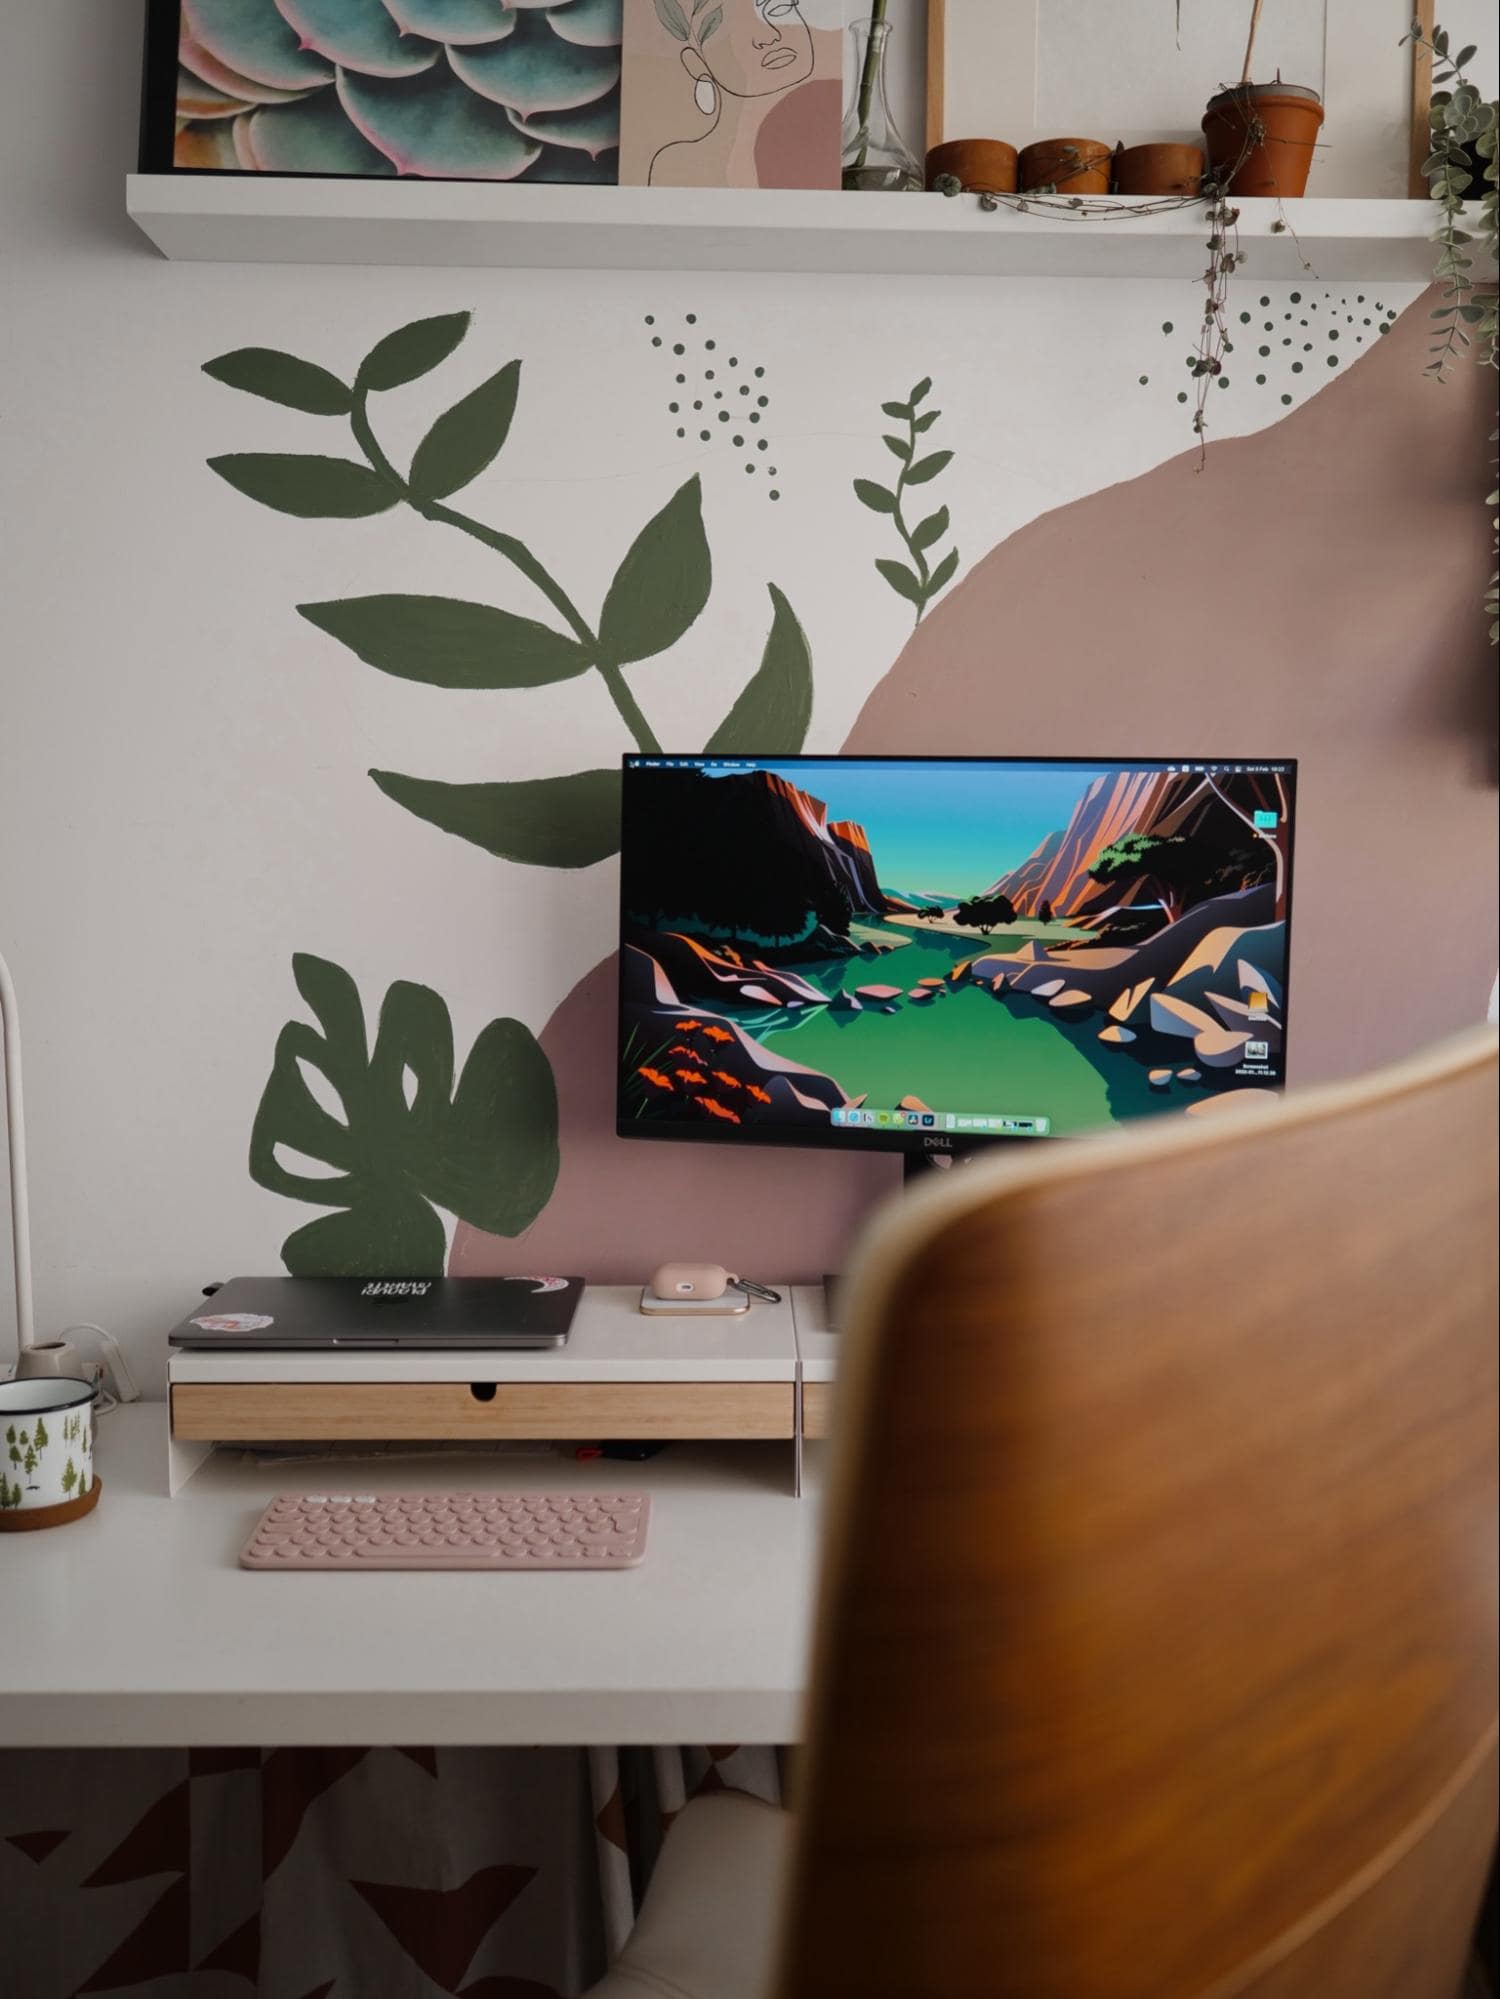 A DIY home office setup with a wireless Logitech K380 keyboard and a DELL monitor